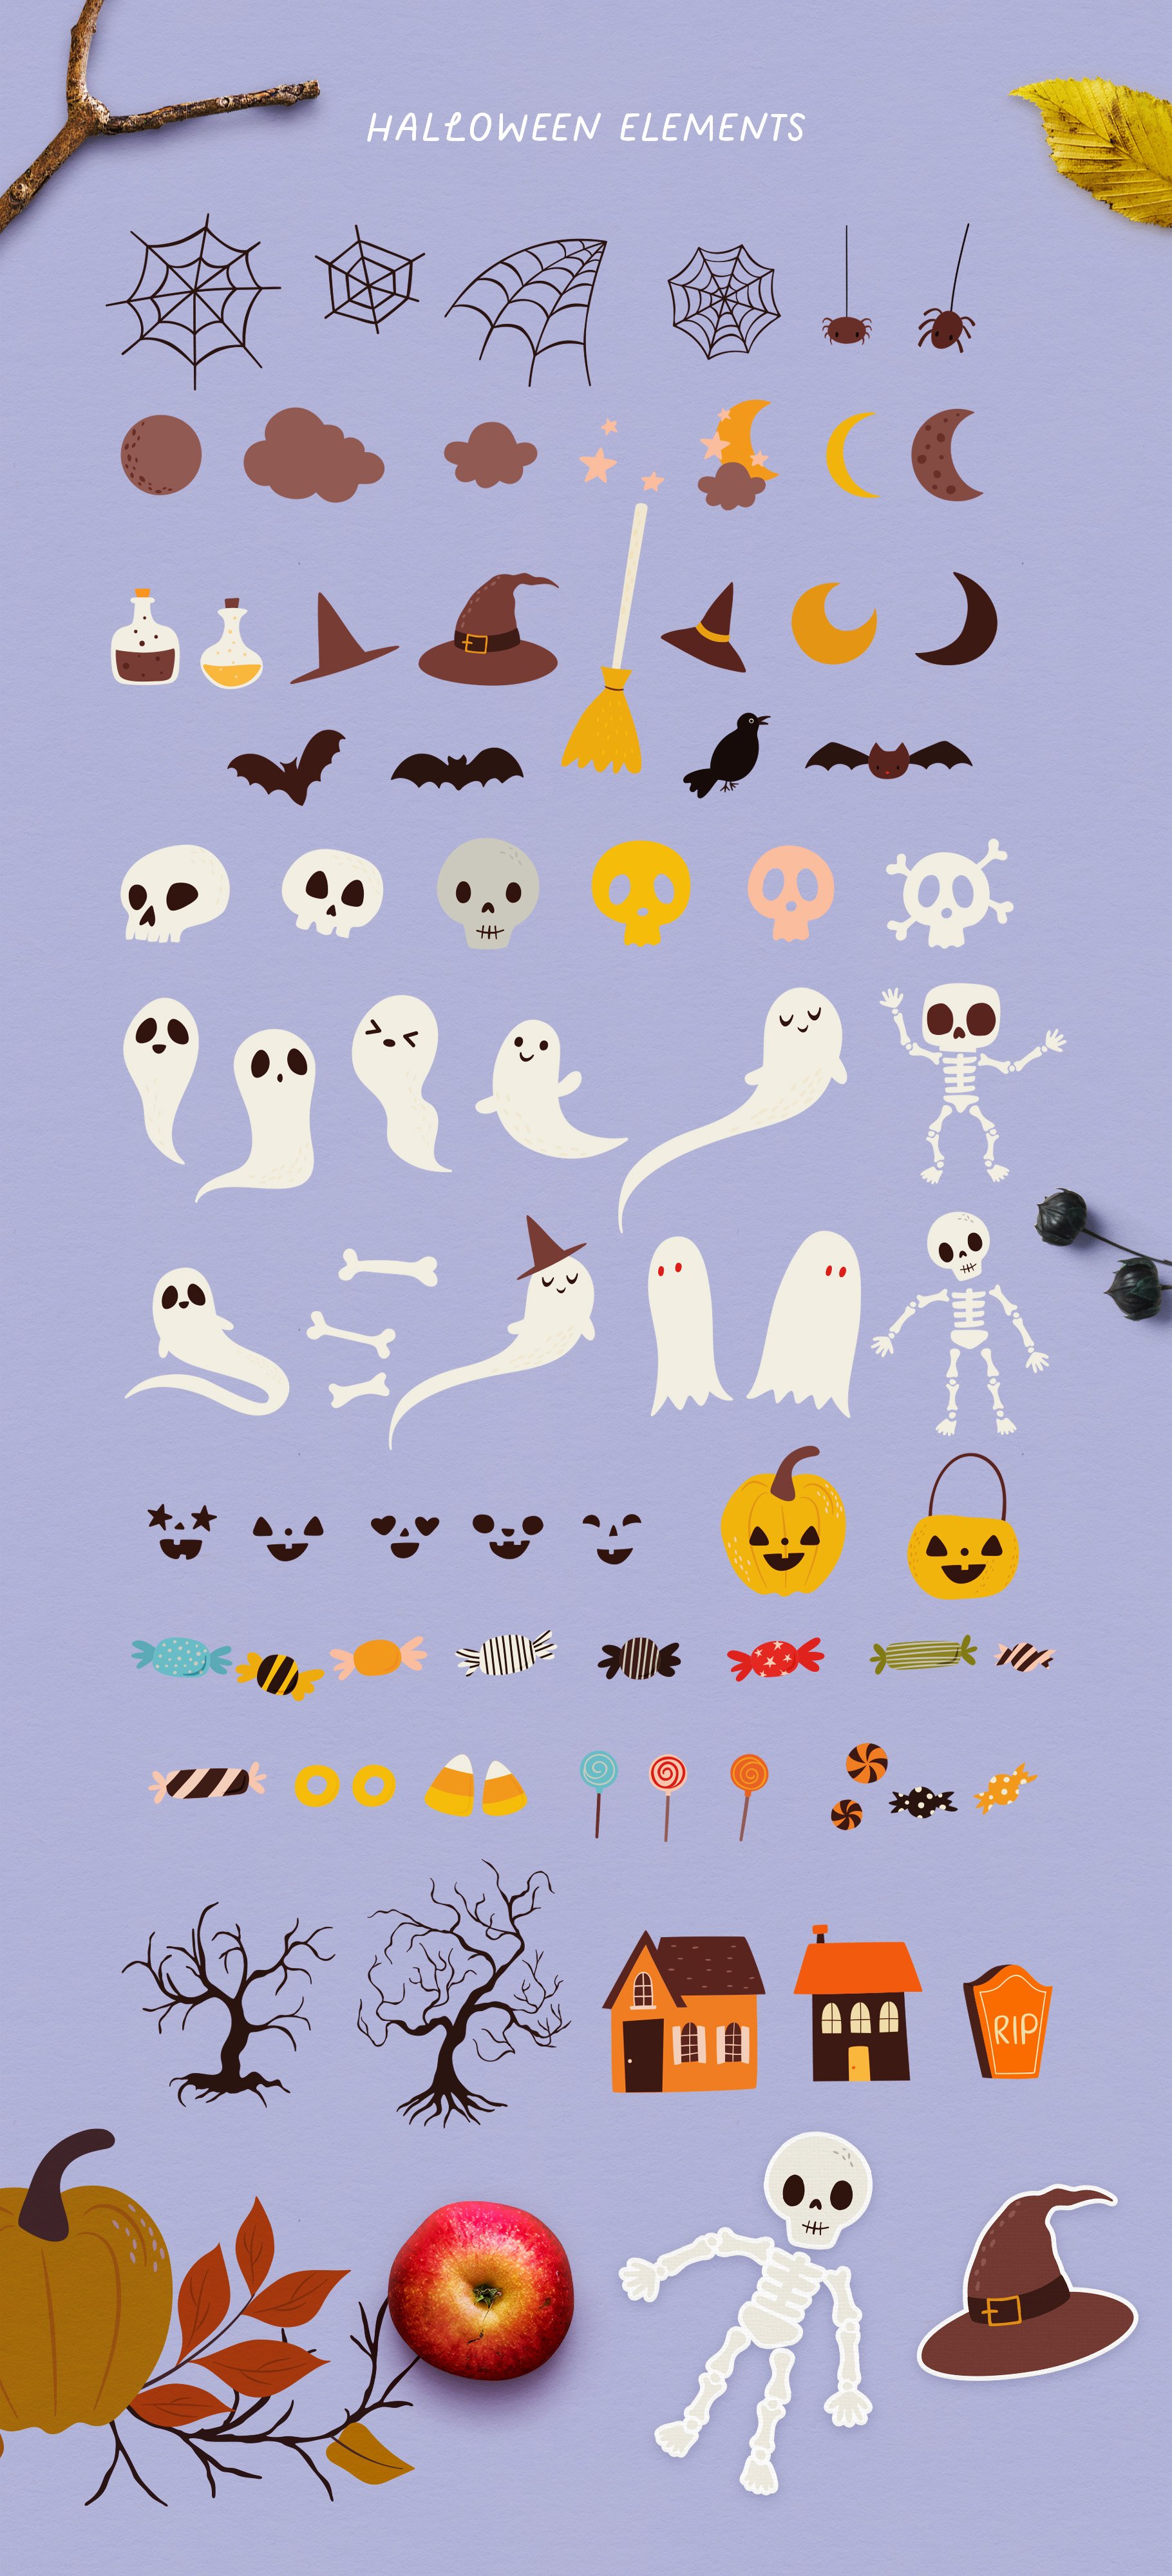 Fall In Love With Autumn And Halloween - Design Cuts